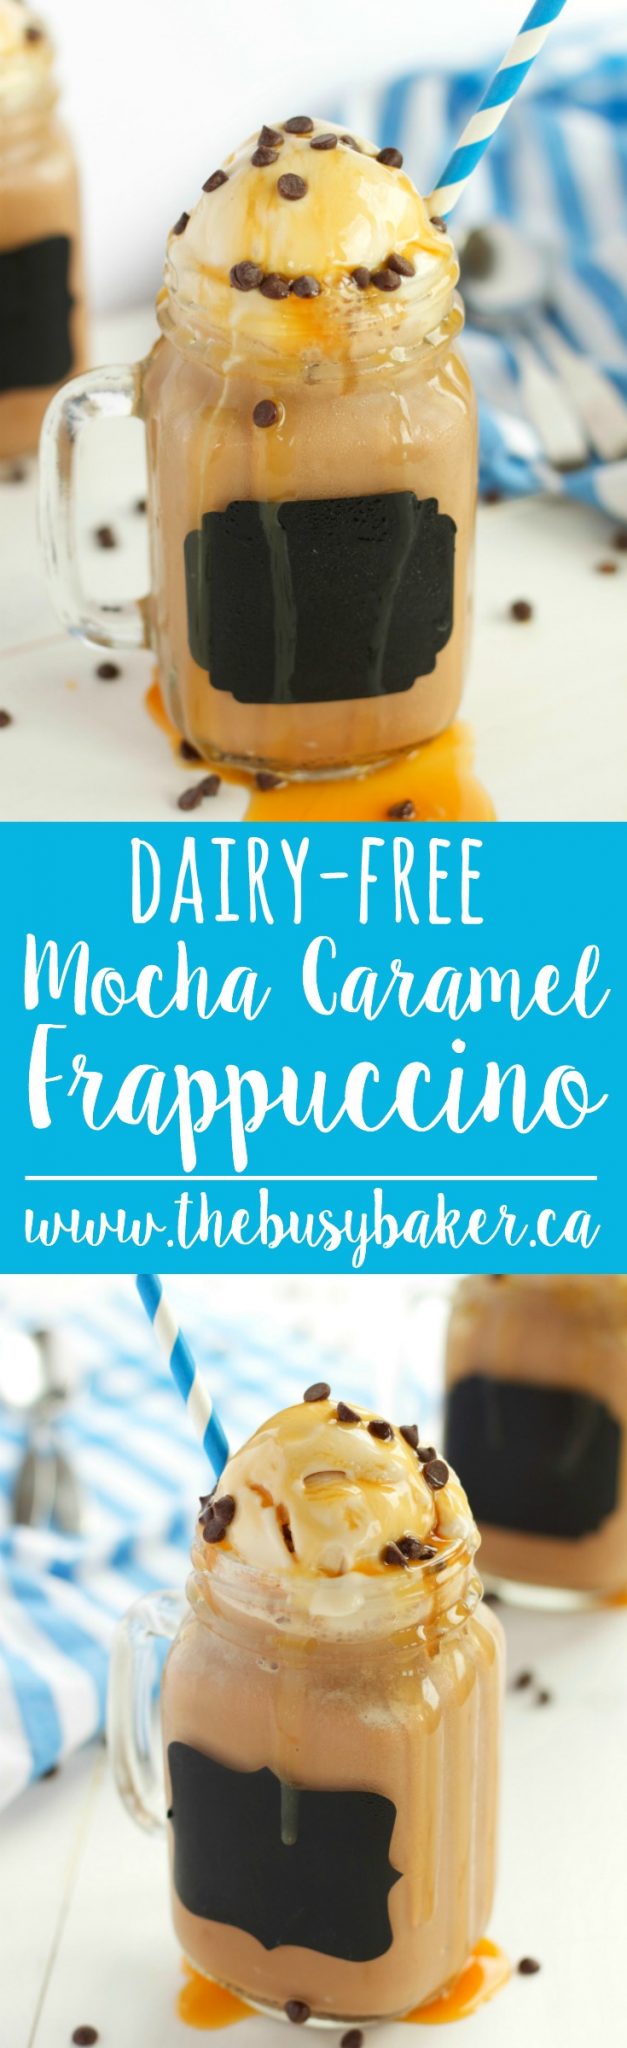 This Dairy-Free Mocha Caramel Frappuccino is flavoured with a hint of coffee, caramel and chocolate, and it's completely dairy-free, gluten-free, and vegan! Recipe by thebusybaker.ca! via @busybakerblog